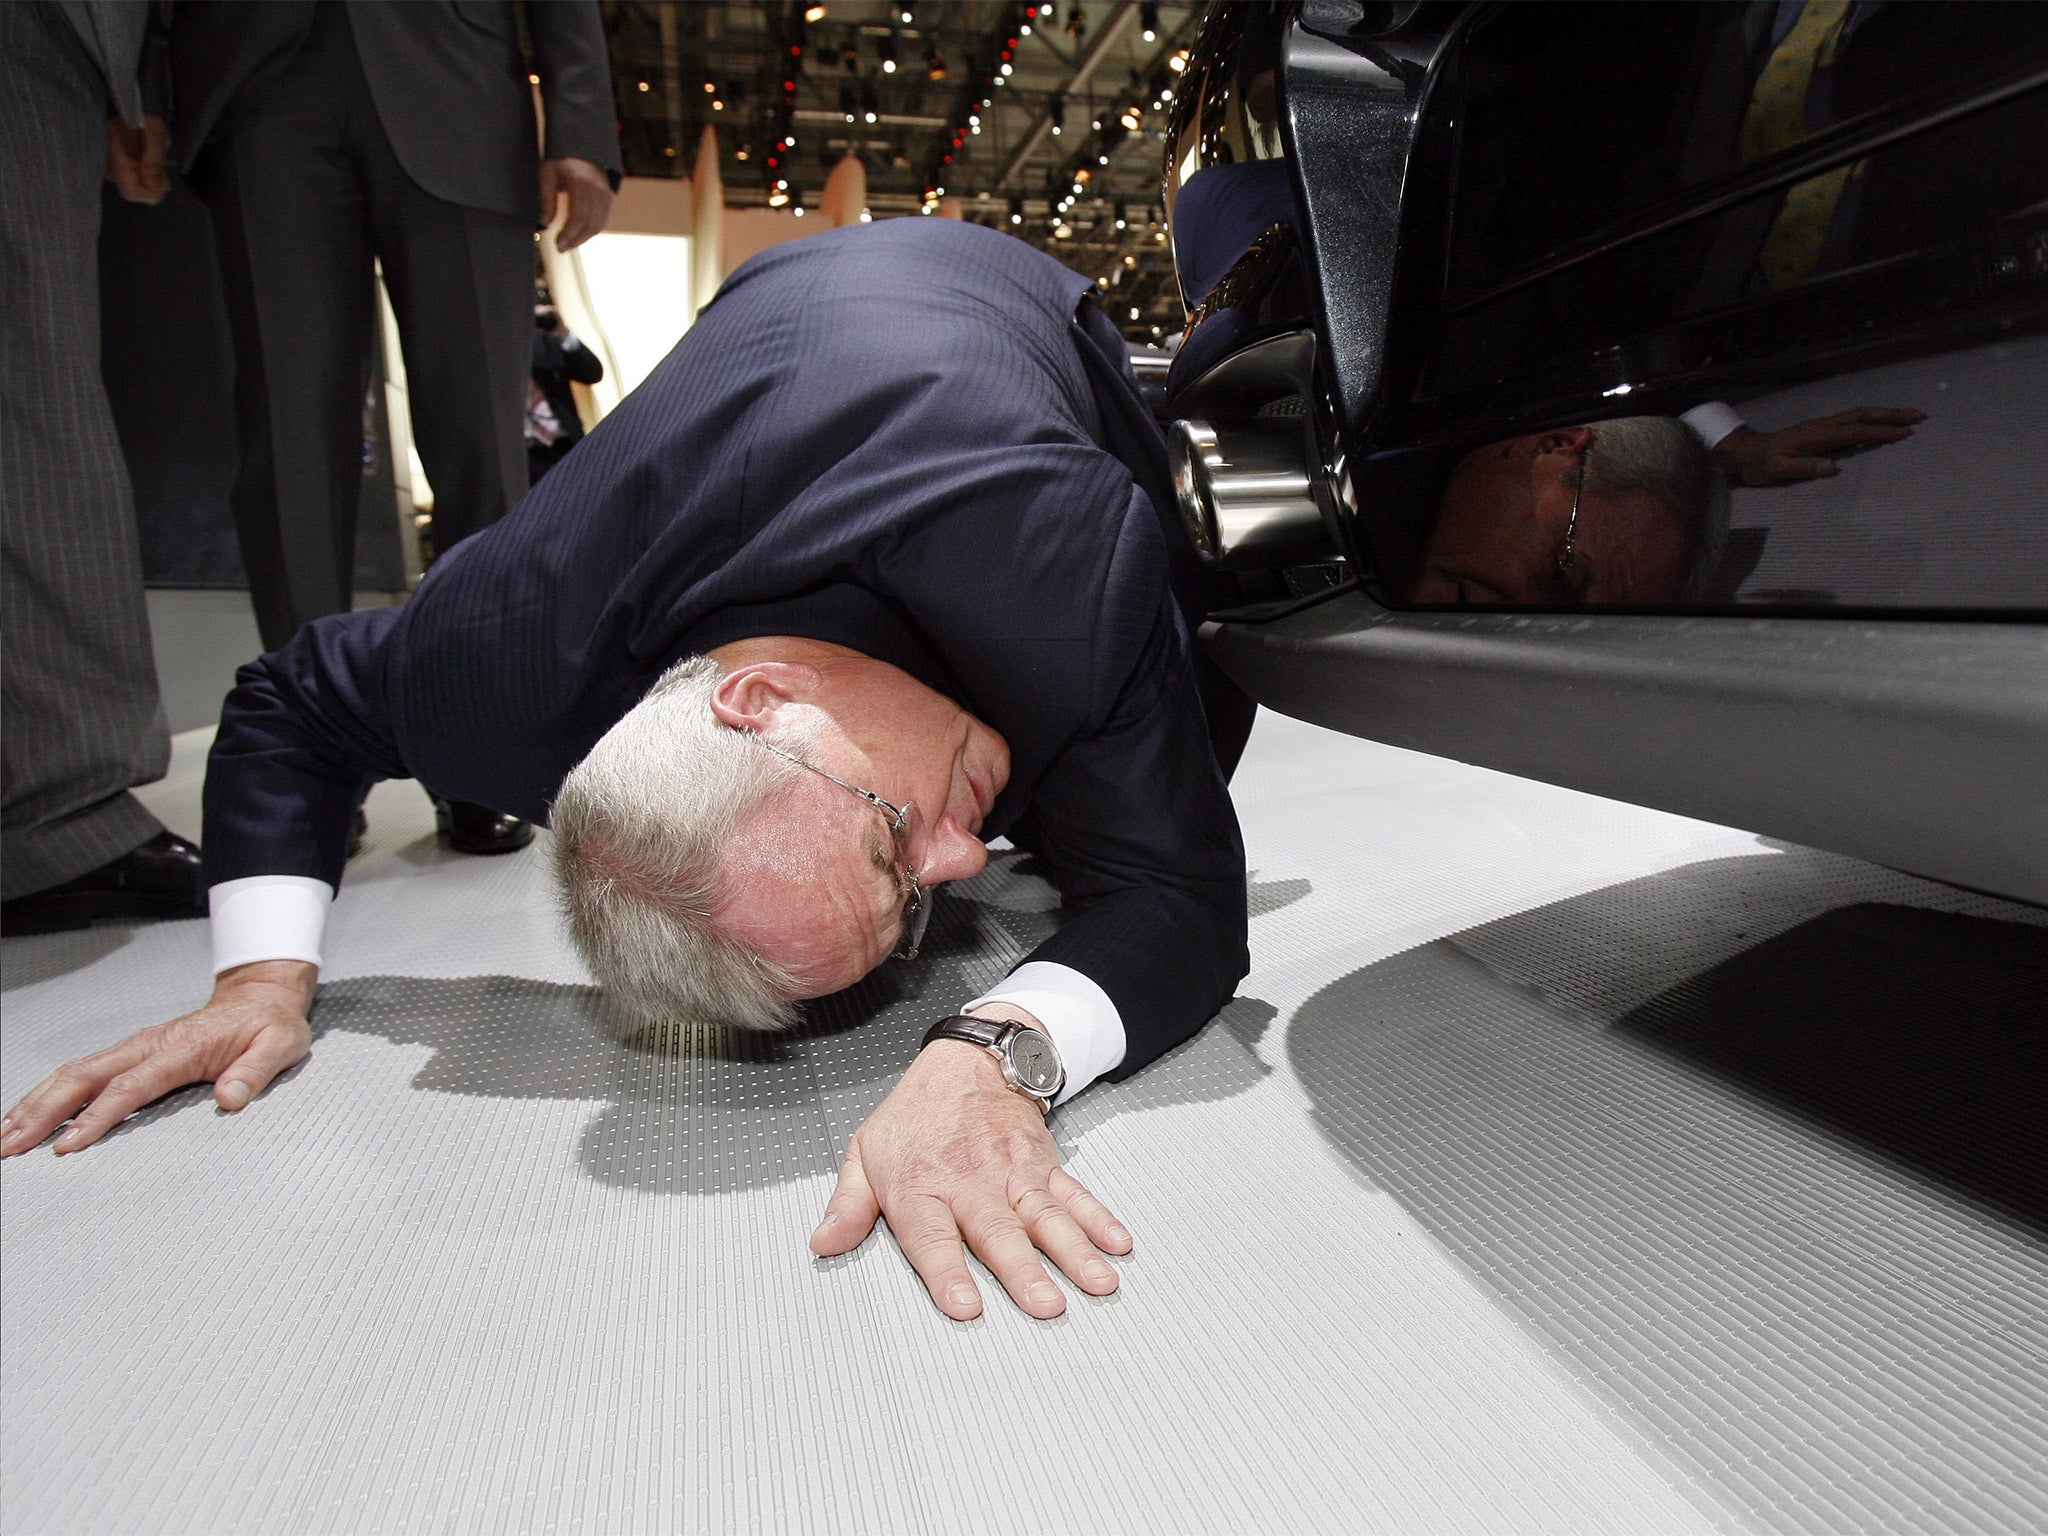 'Endlessly sorry': the words of VW’s boss Martin Winterkorn ring true as the costs could spiral